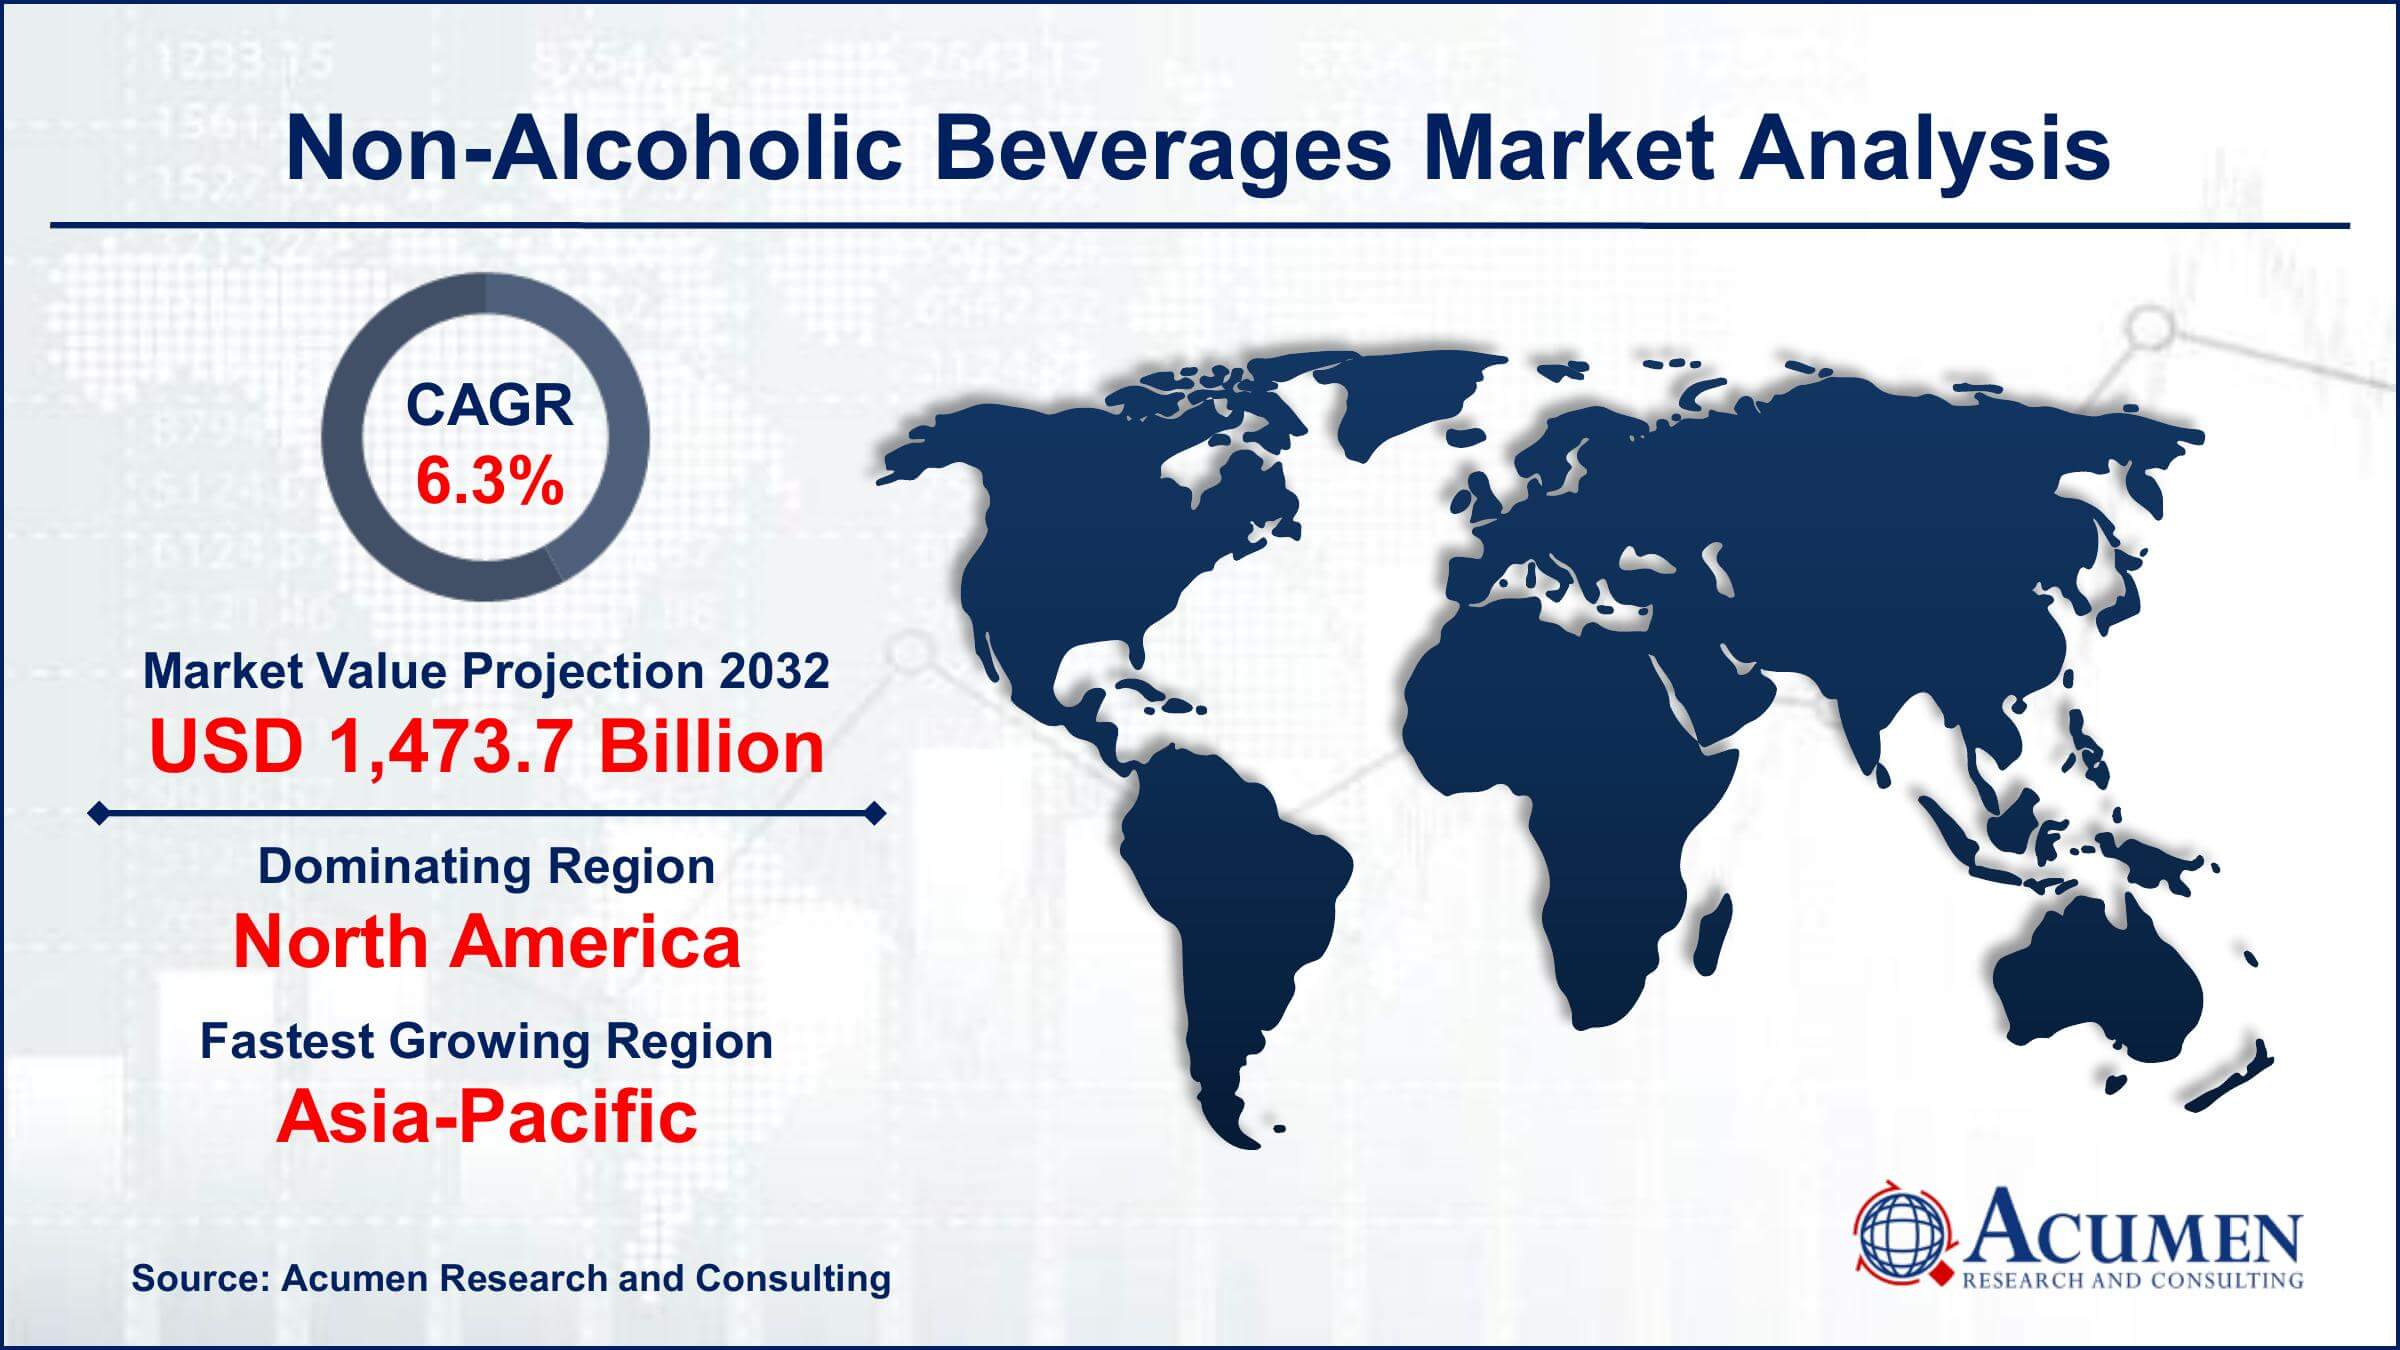 Global Non-Alcoholic Beverages Market Trends